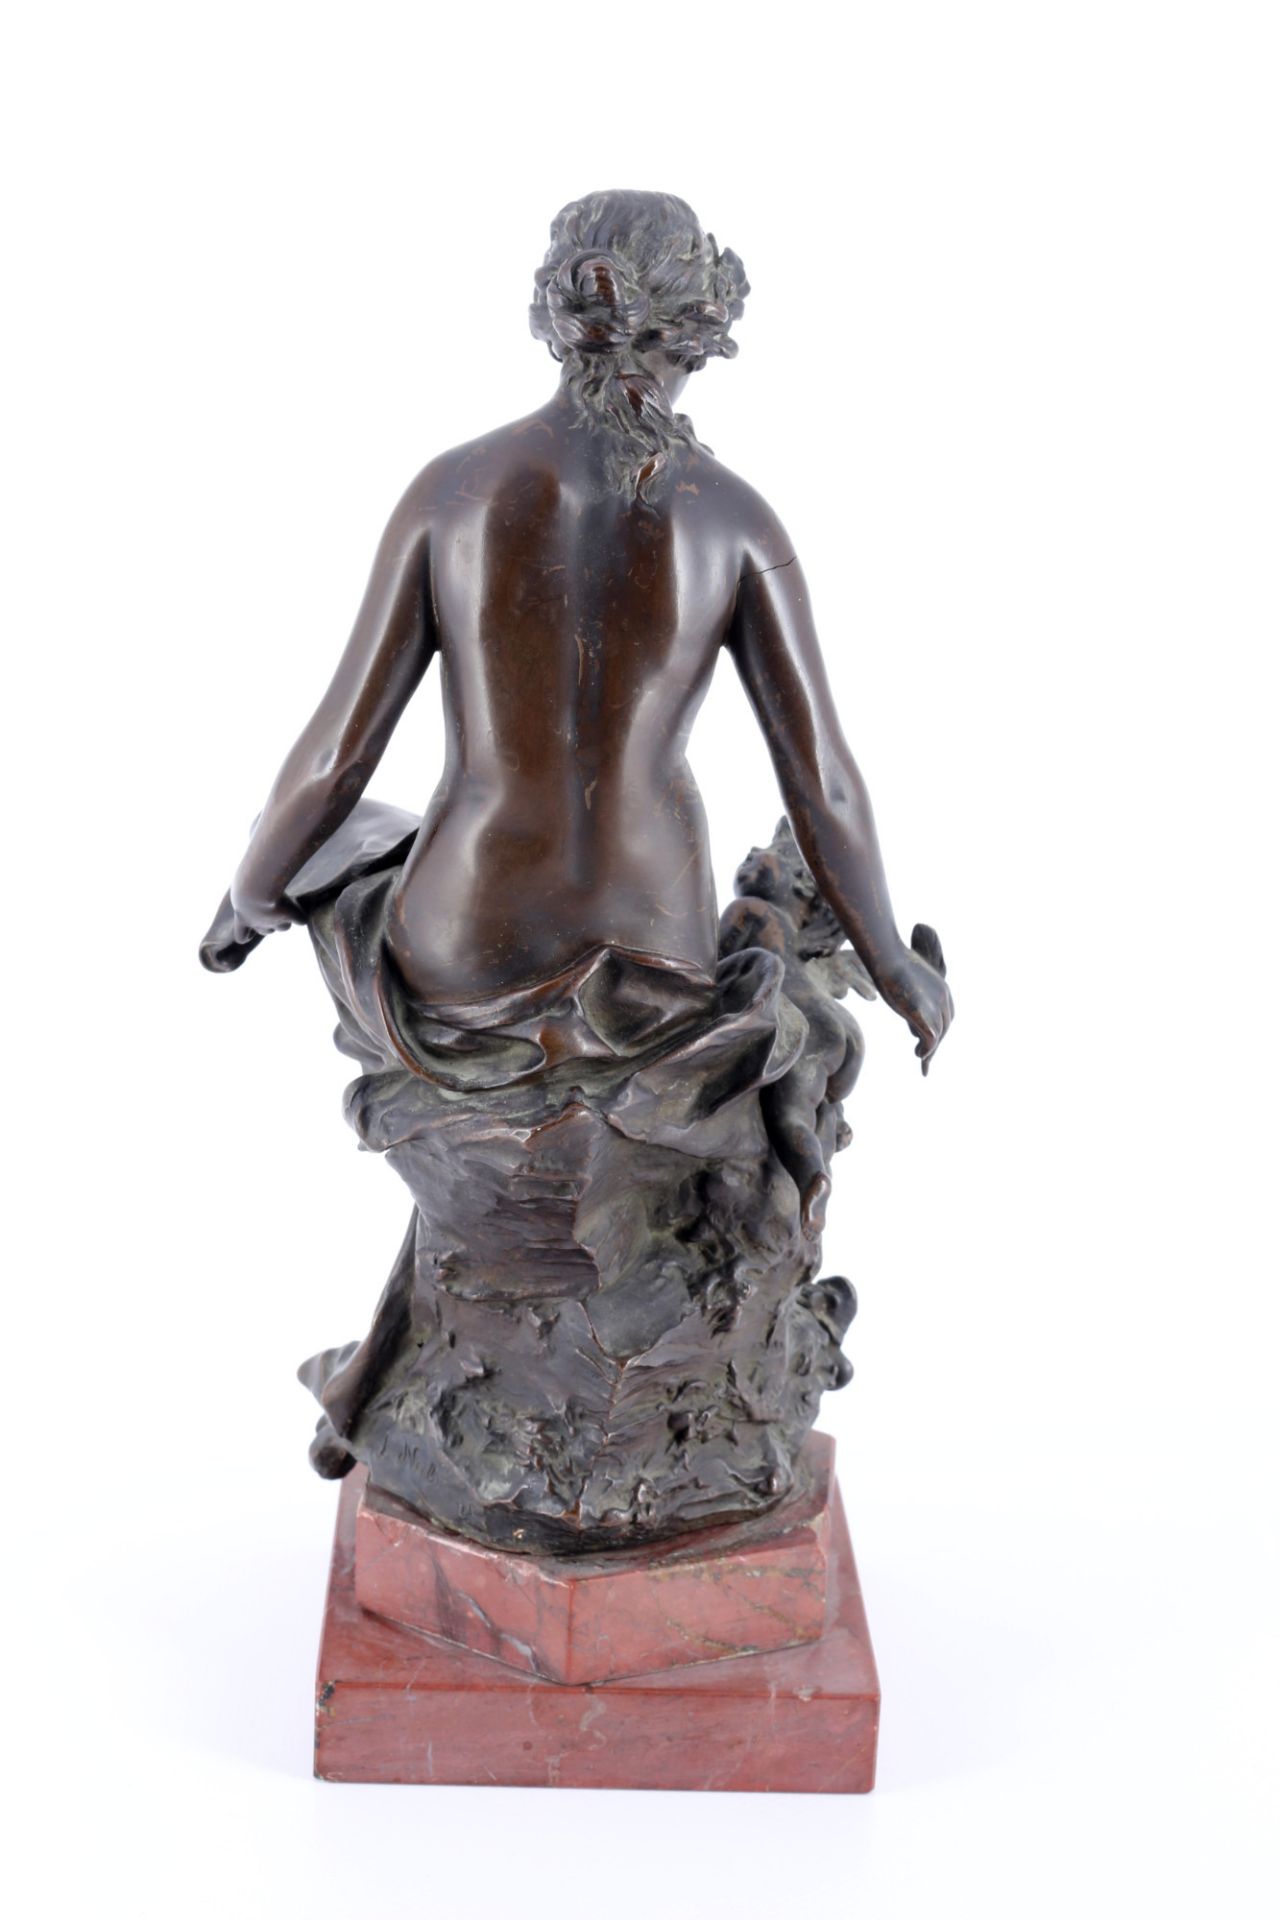 19th century sculptor, J. NEELS, female nude with Cupid, Frauenakt mit Amor - Image 4 of 6